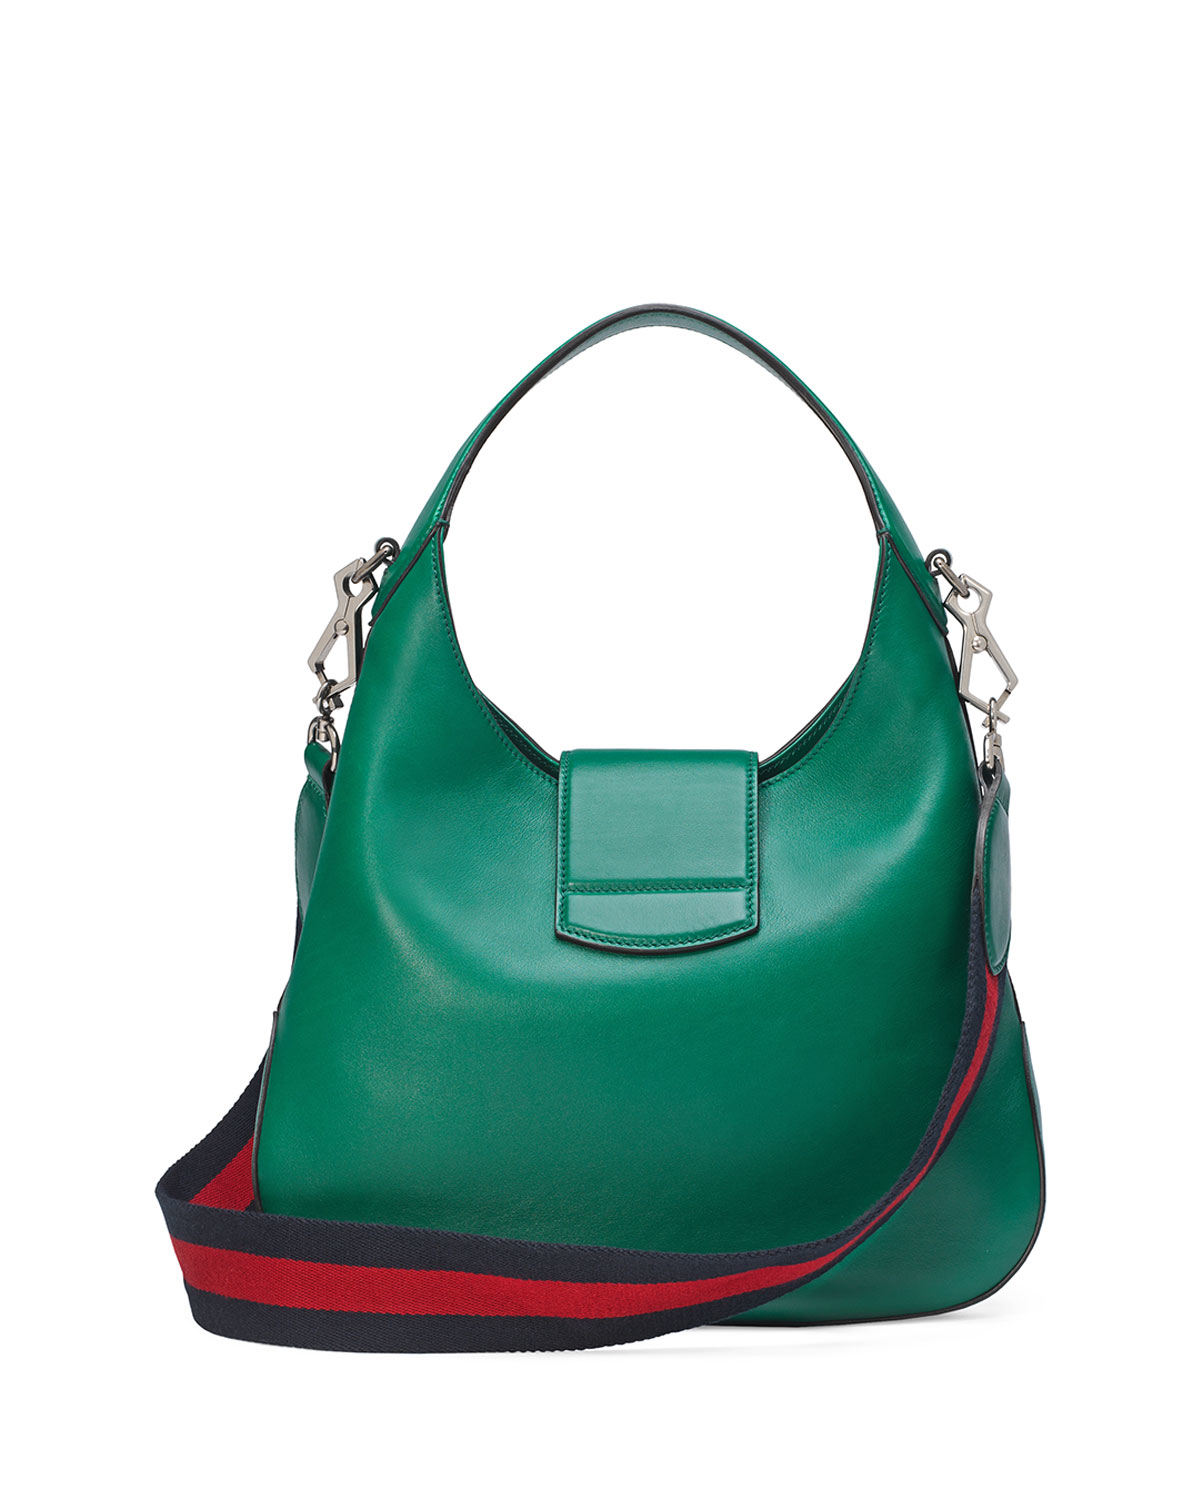 Gucci Dionysus Small Embroidered-Tiger Leather Hobo Bag in Green - Lyst